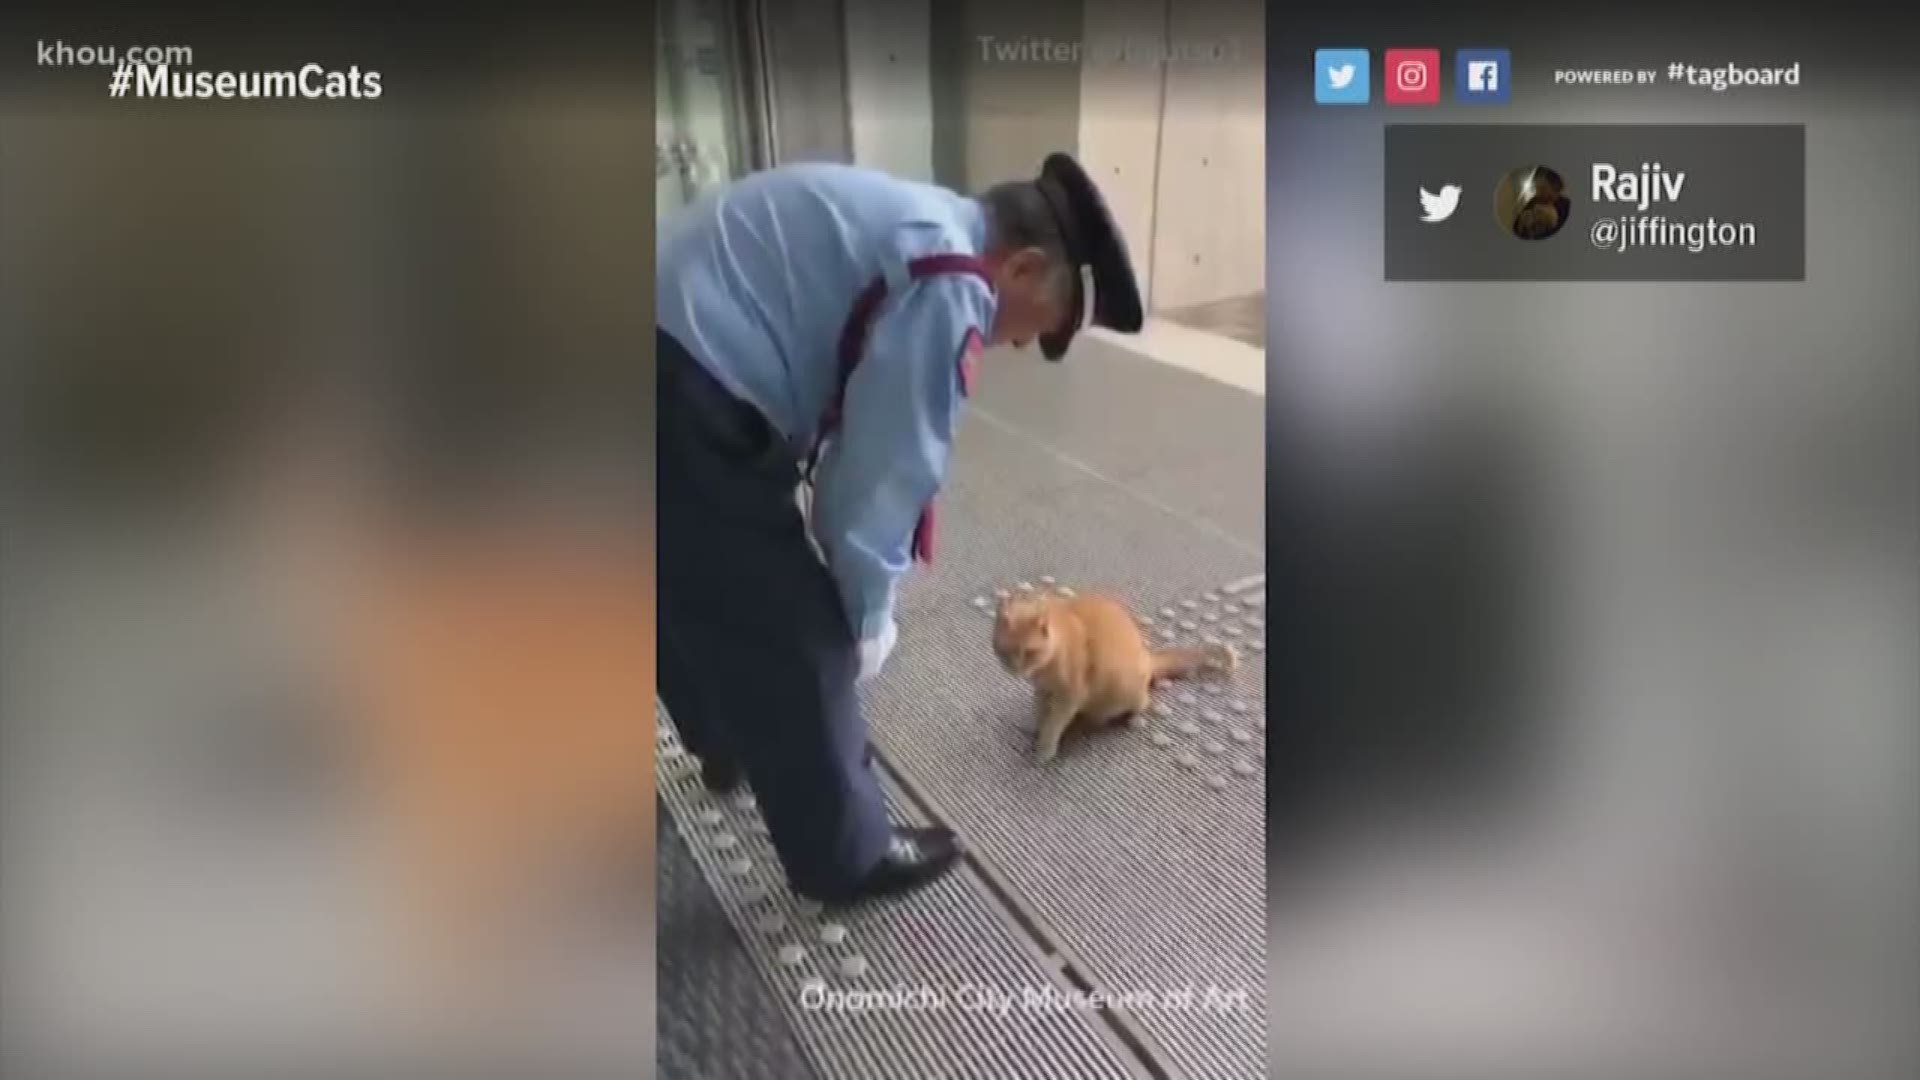 Some curious cats were craving some culture when they tried to get into a museum in Hiroshima.